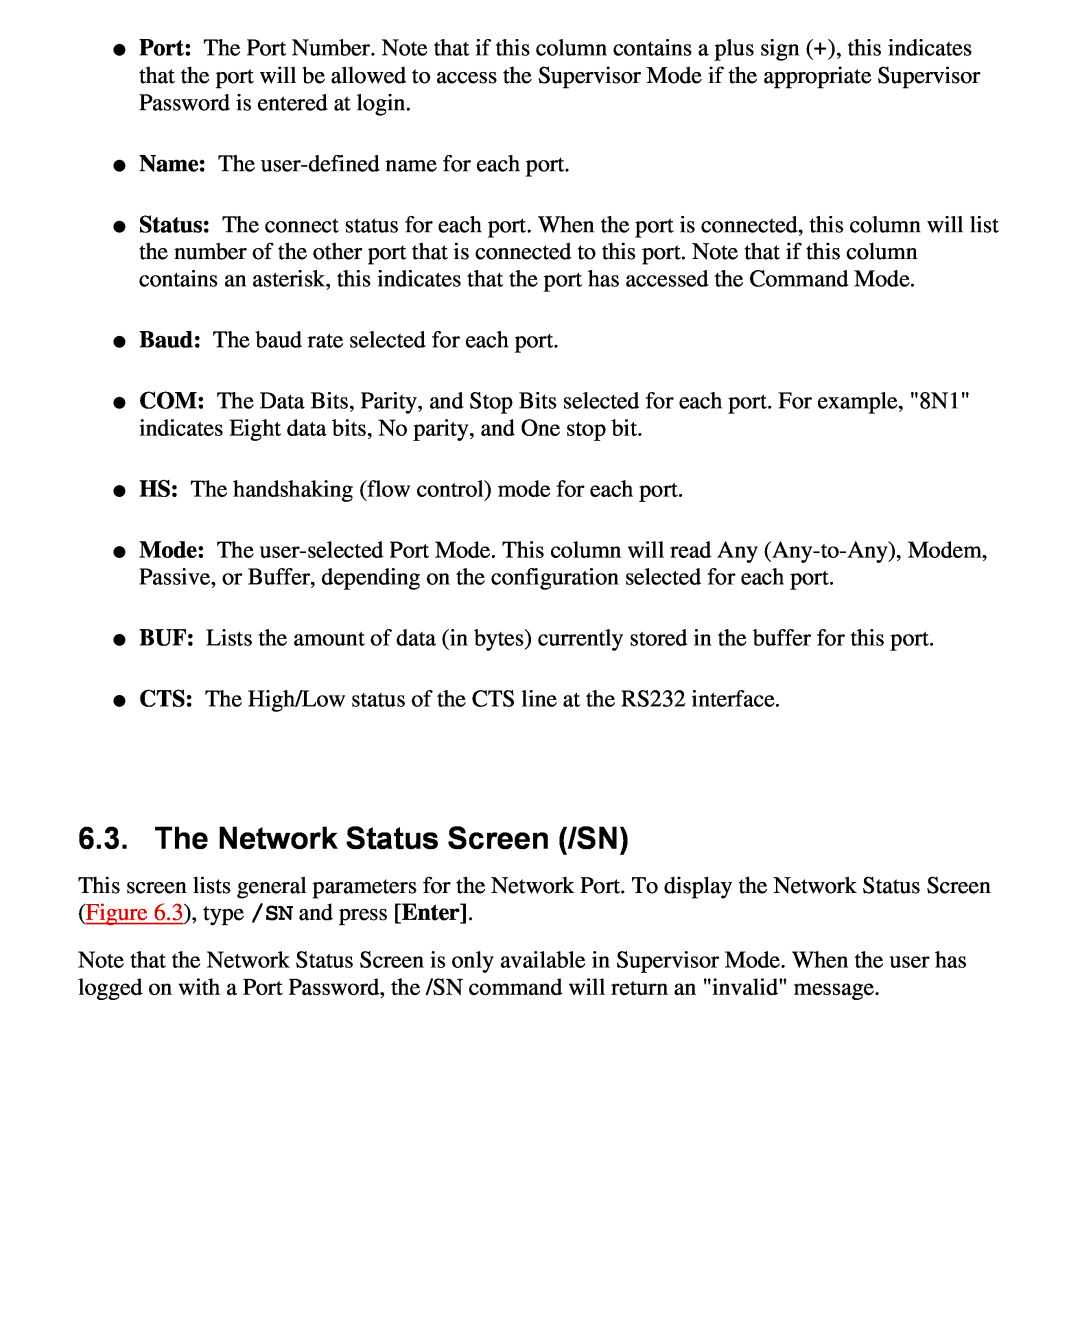 Western Telematic CMS-16 manual The Network Status Screen /SN 